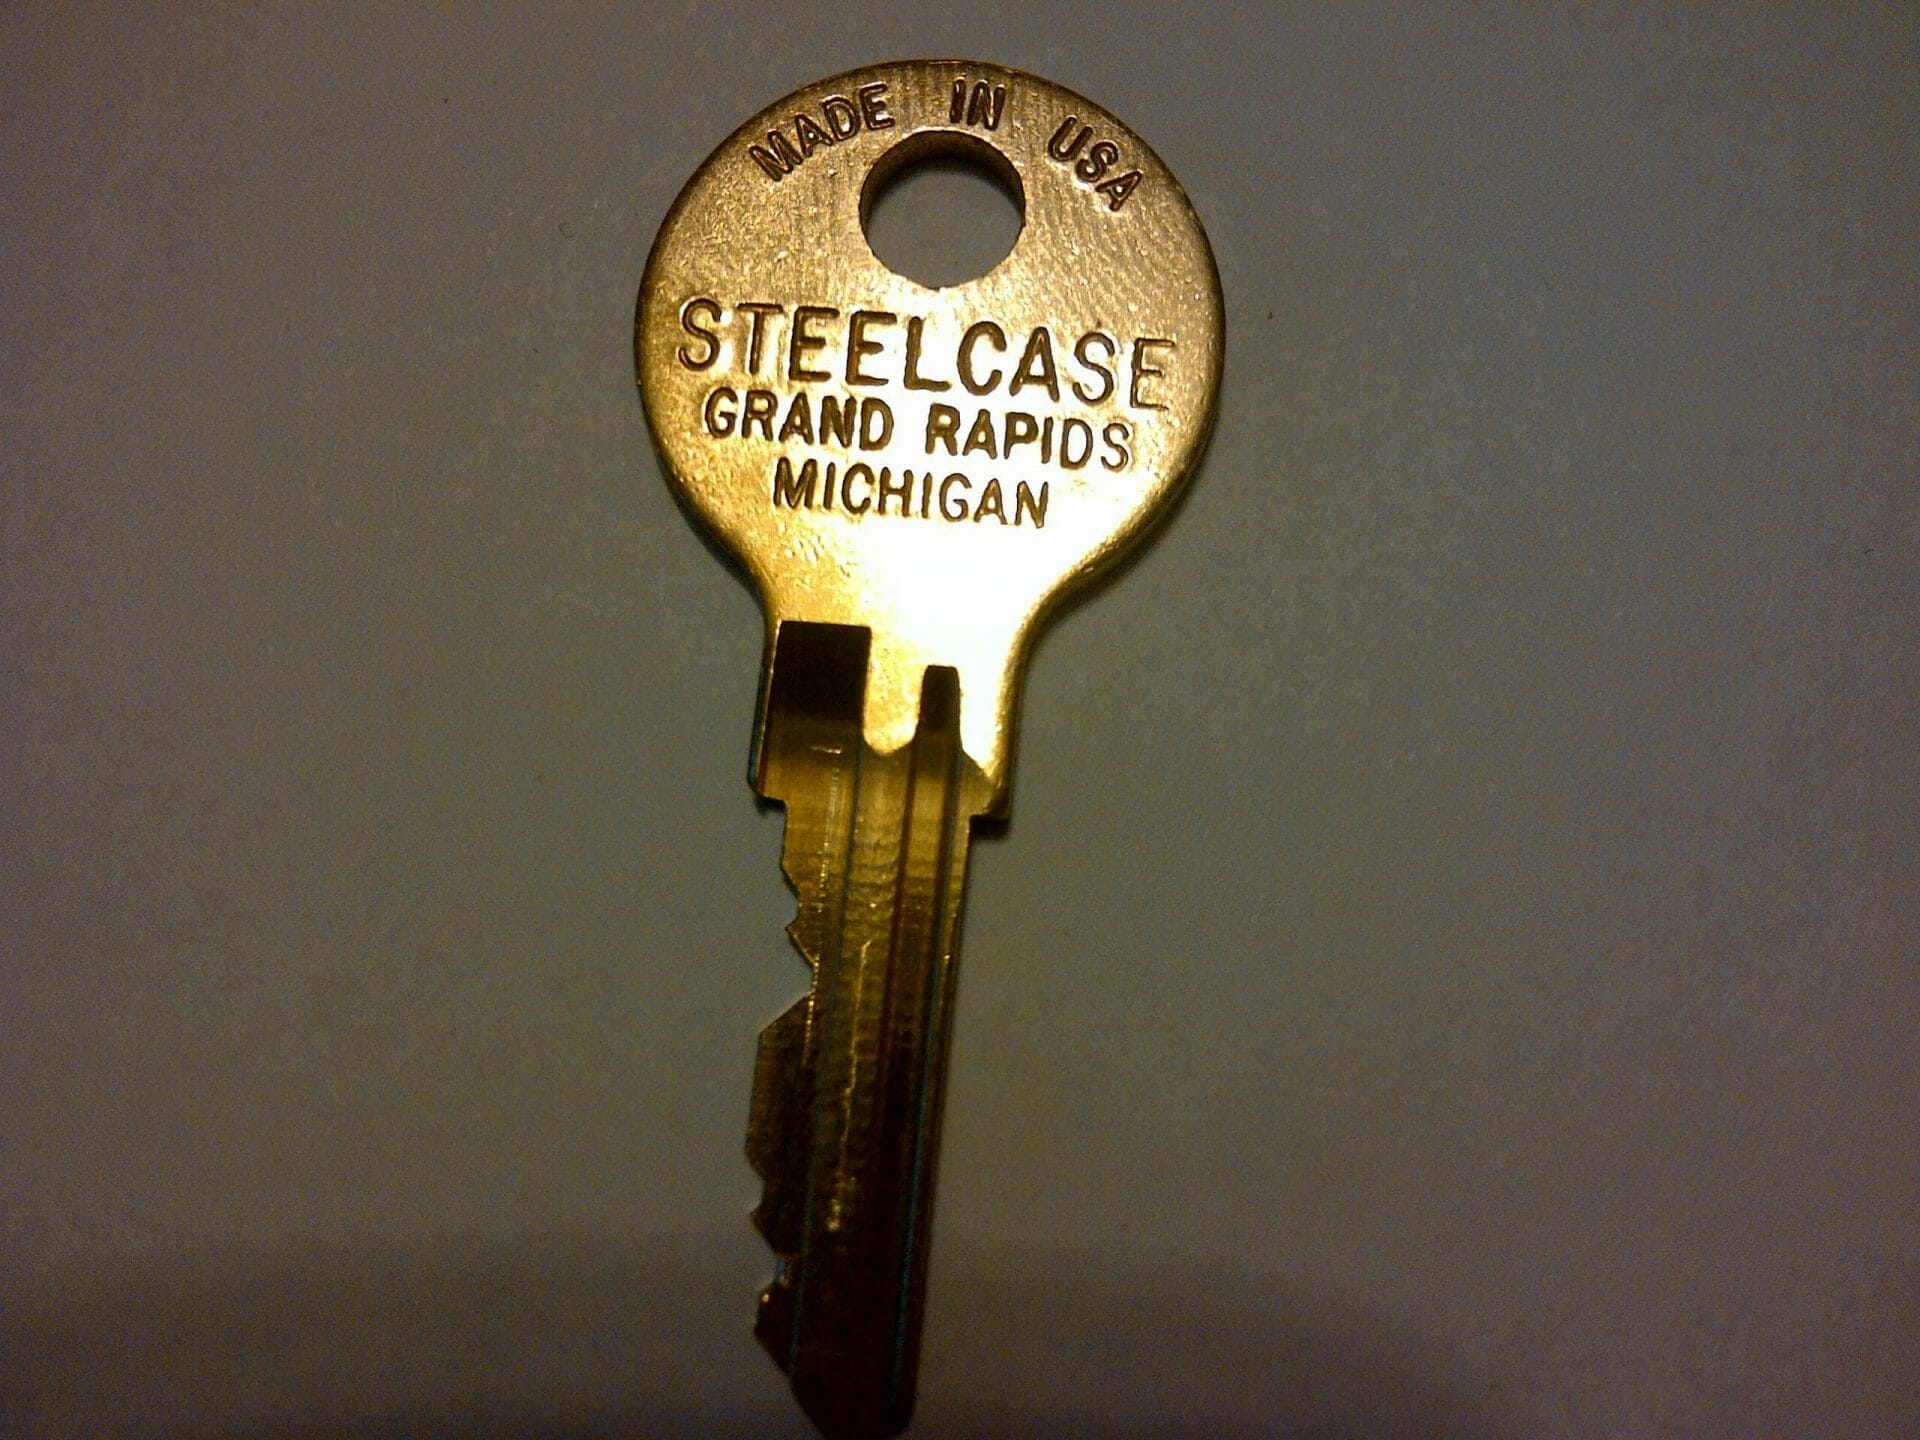 get 1 50% off Replacement Steelcase Furniture Key FR358 Buy 1 